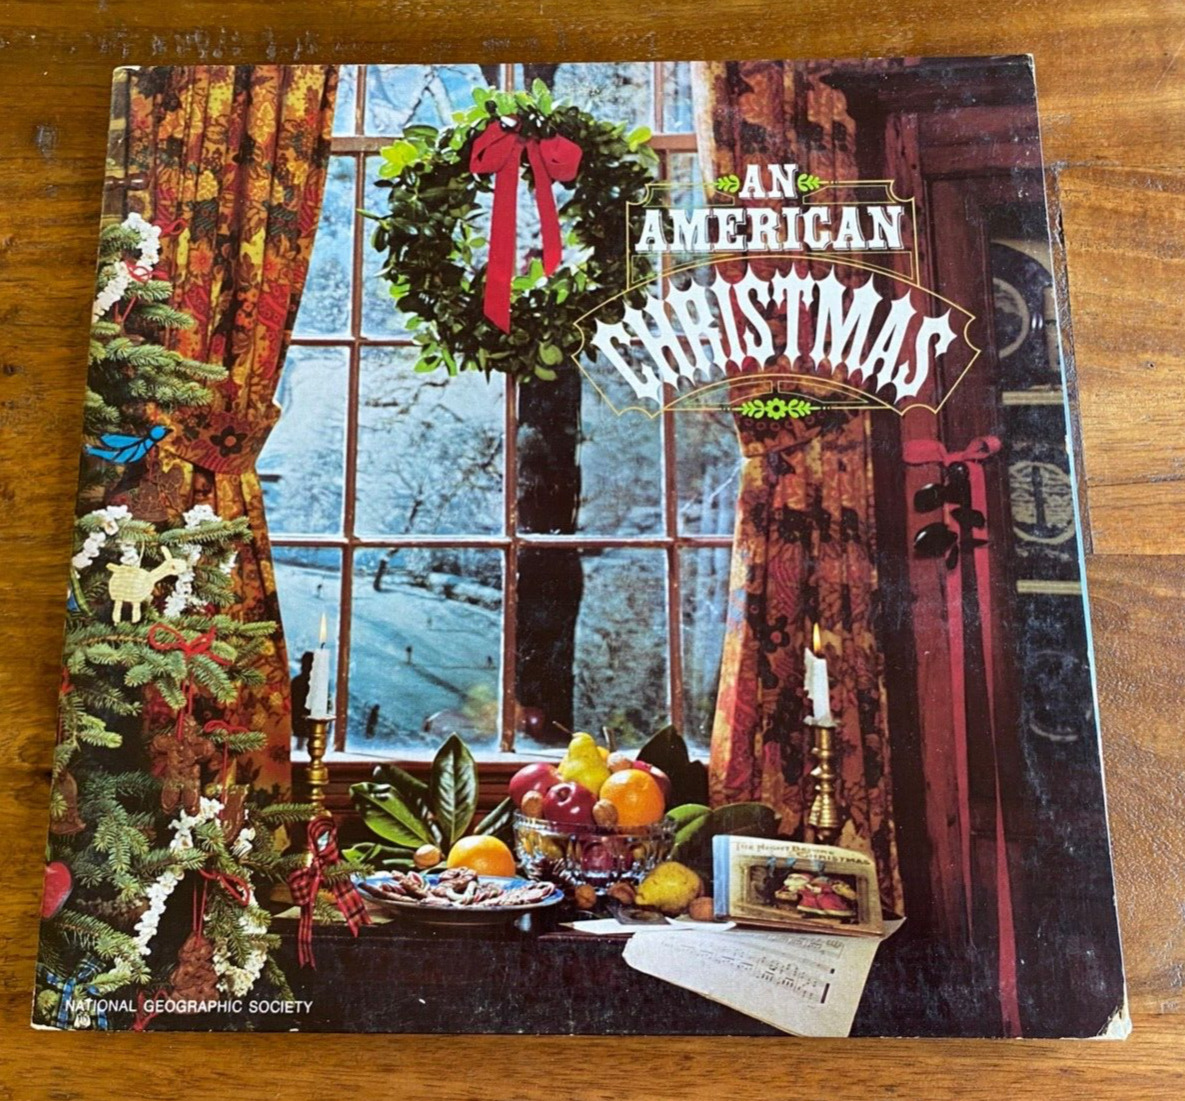 MINT - An American Christmas National Geographic Society 07799 stereo 1977